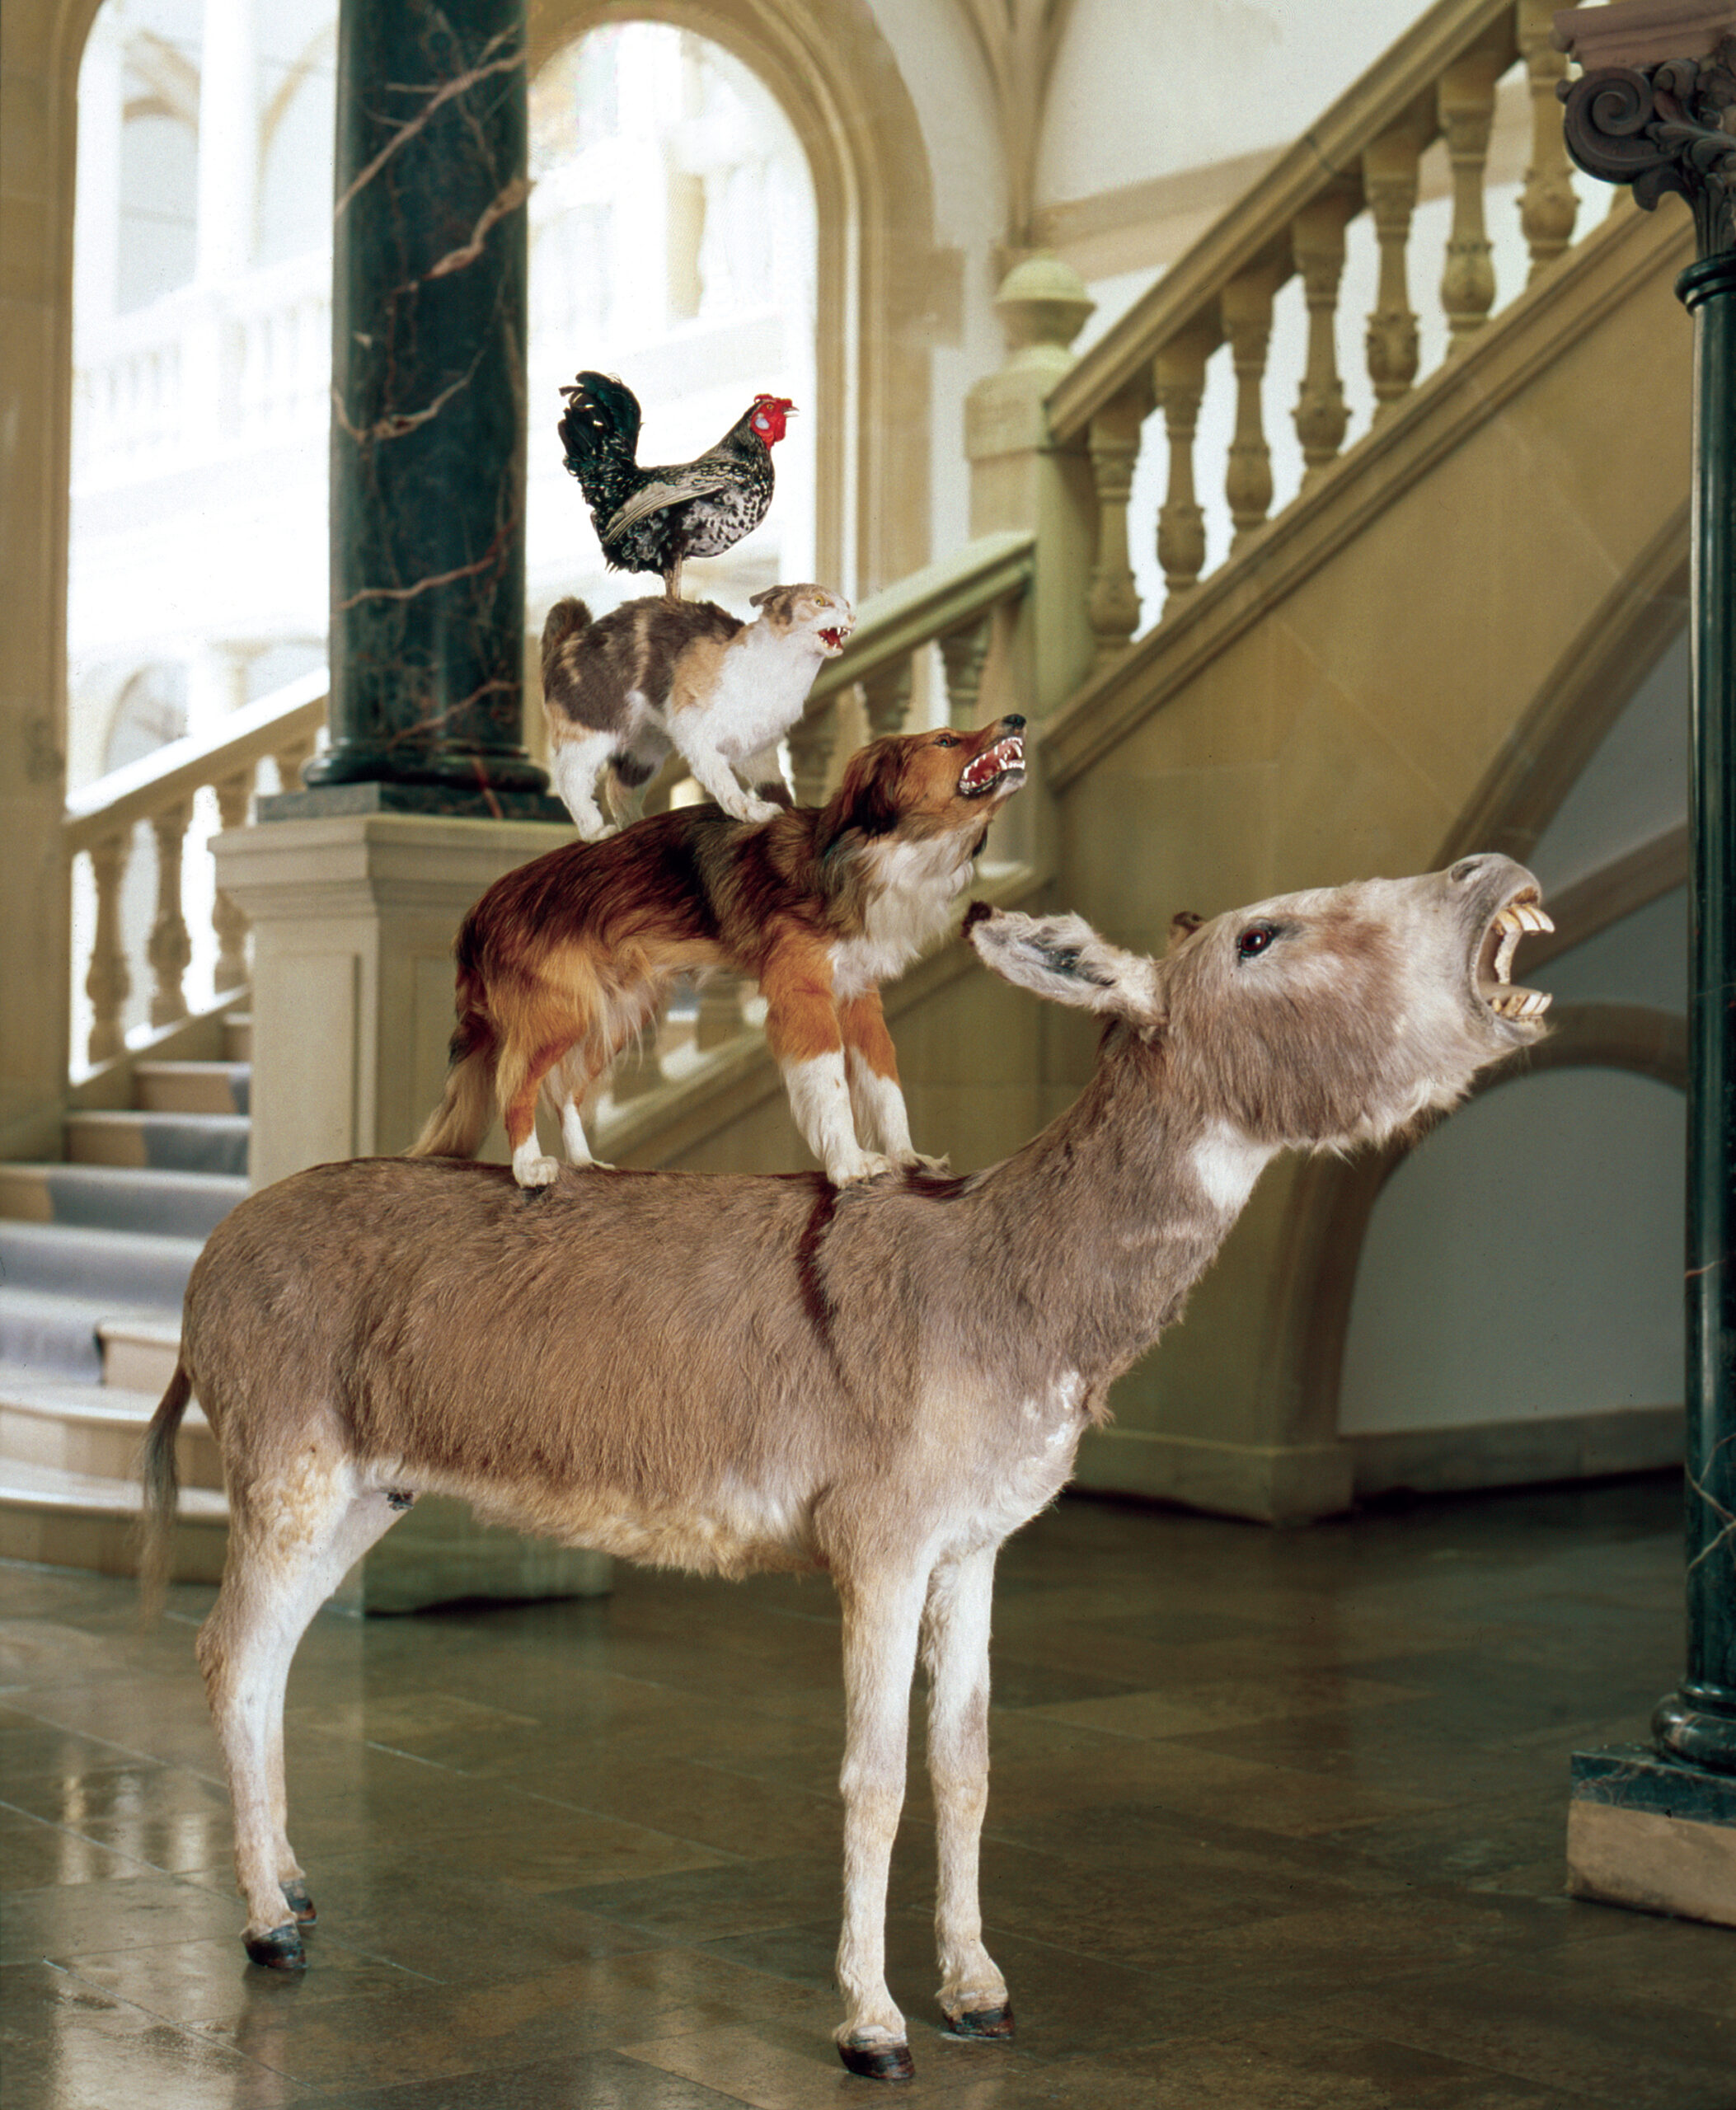 Maurizio Cattelan, Love Saves Life, 1995, Taxidermied donkey, dog, cat, rooster, 190 x 120 x 60 cm, Installation view, Skulptur